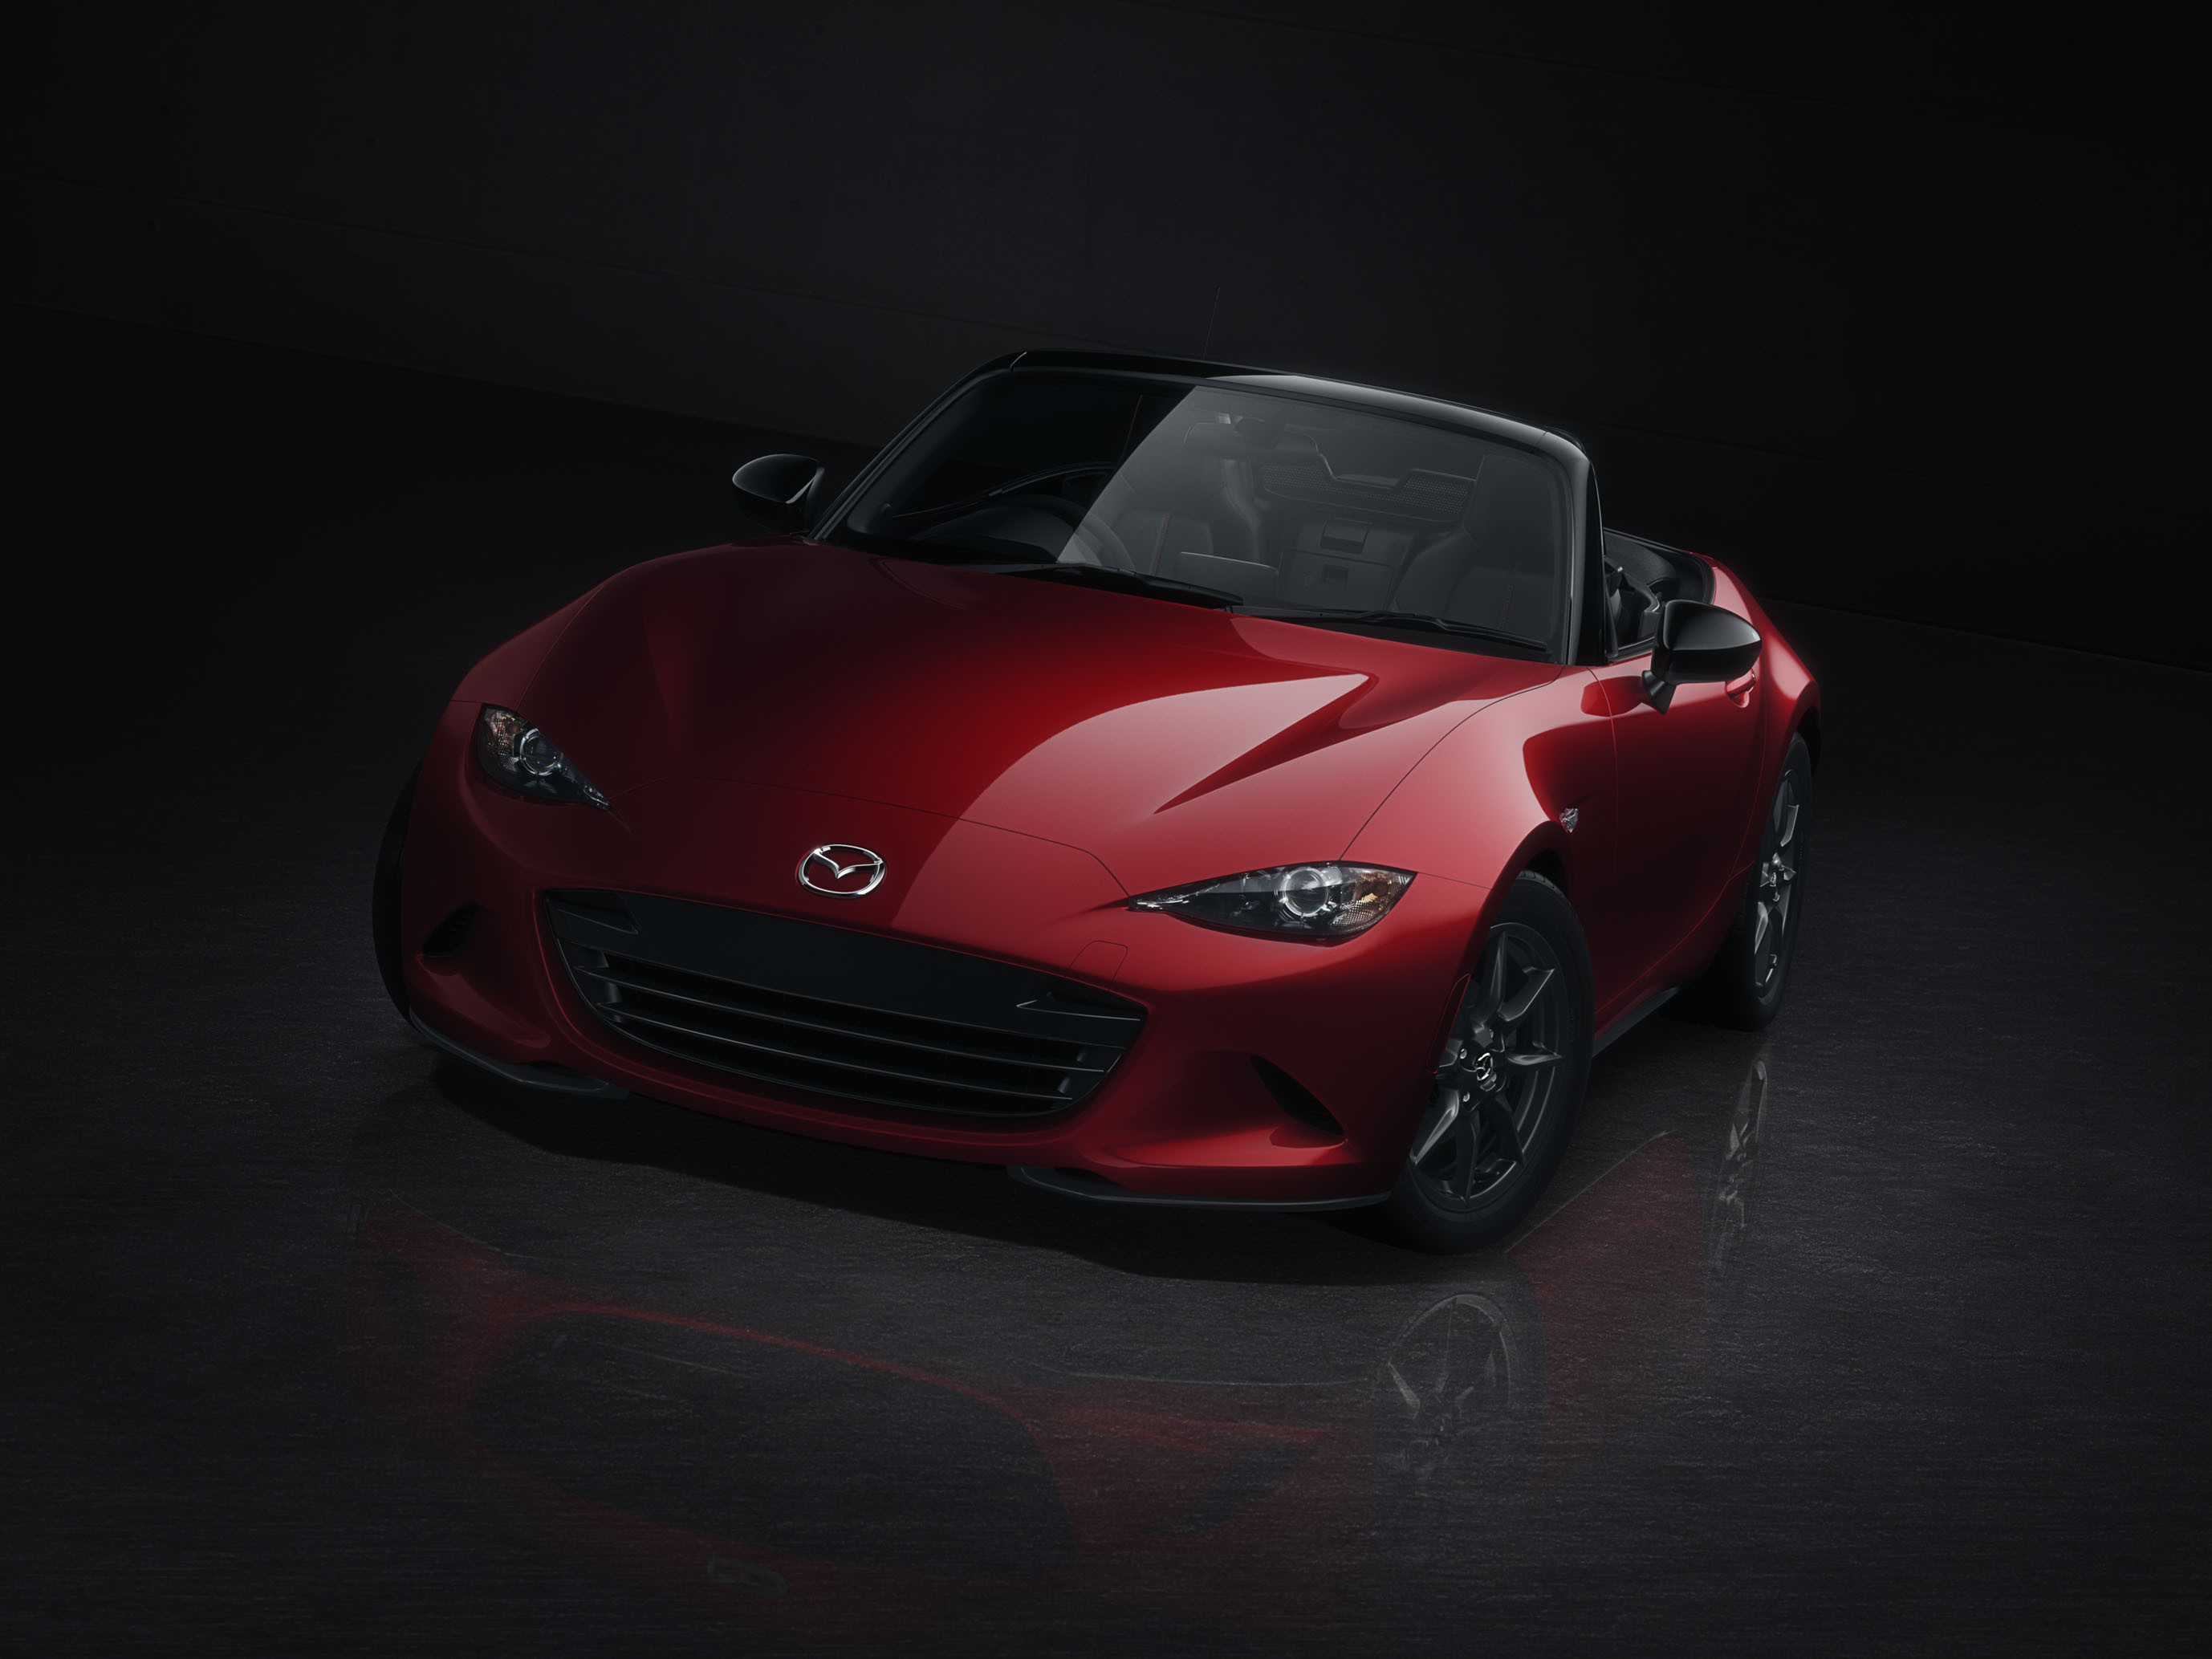 2756x2067 Last week, Mazda finally unveiling the 2016 Mazda (Miata). Now I've been a  huge fan of the Miata since it's inception, and every generation seems to  gets ...